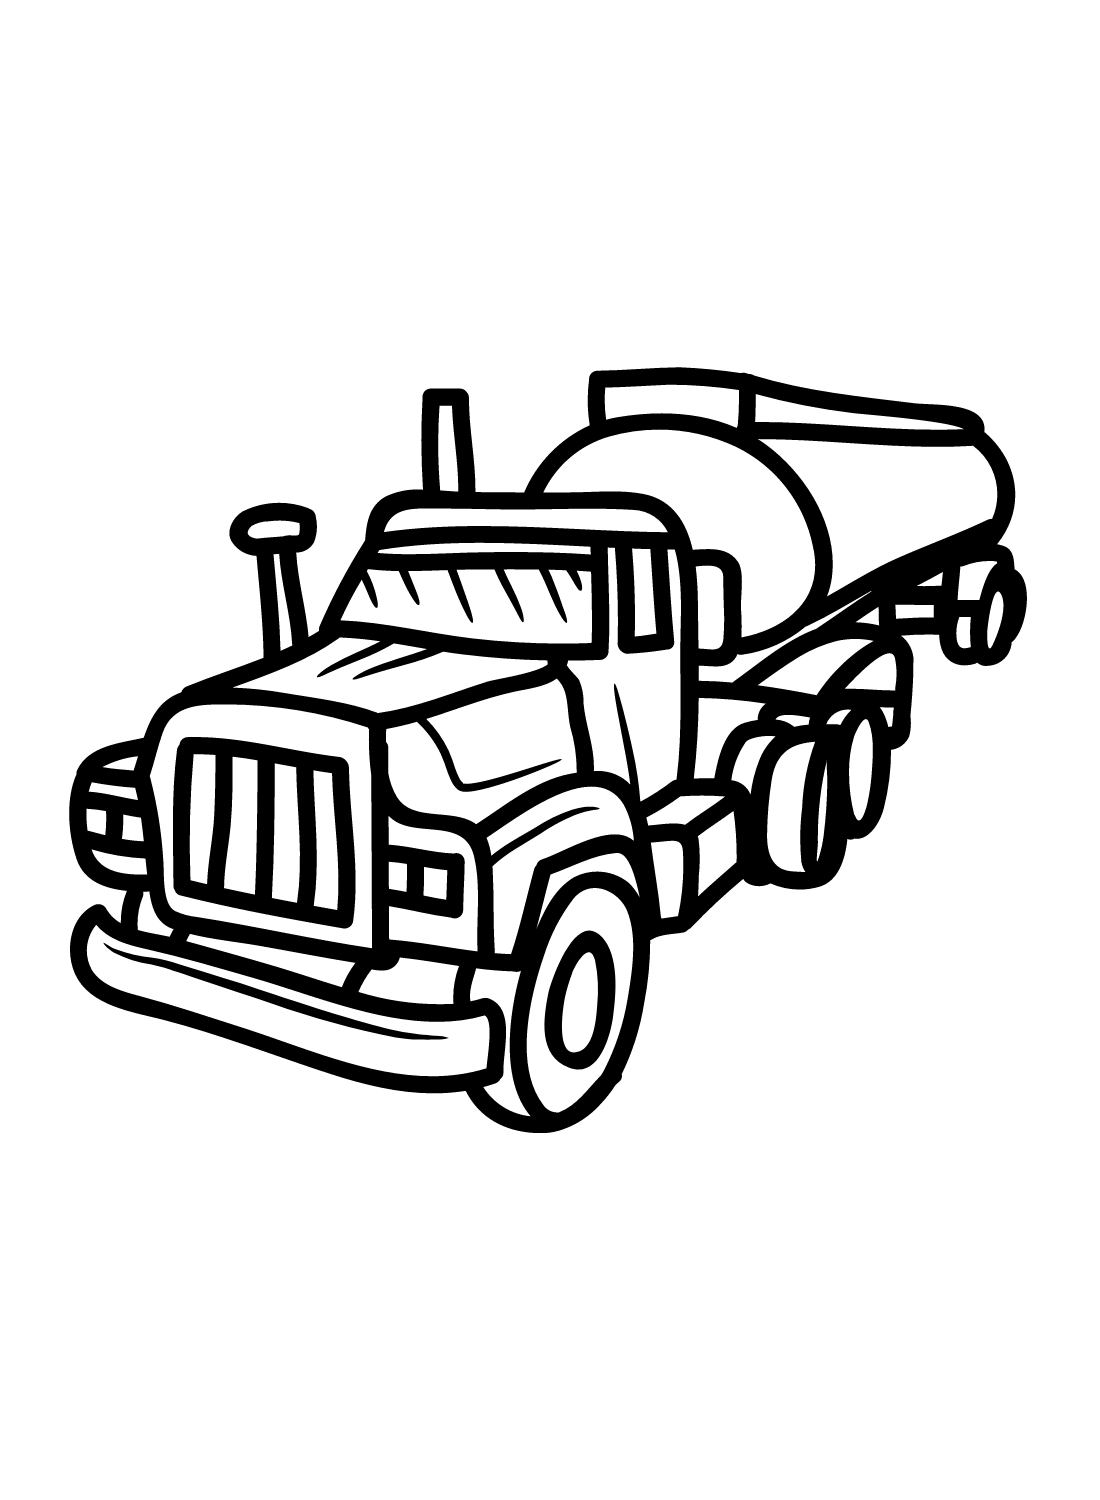 Tanker truck coloring pages printable for free download